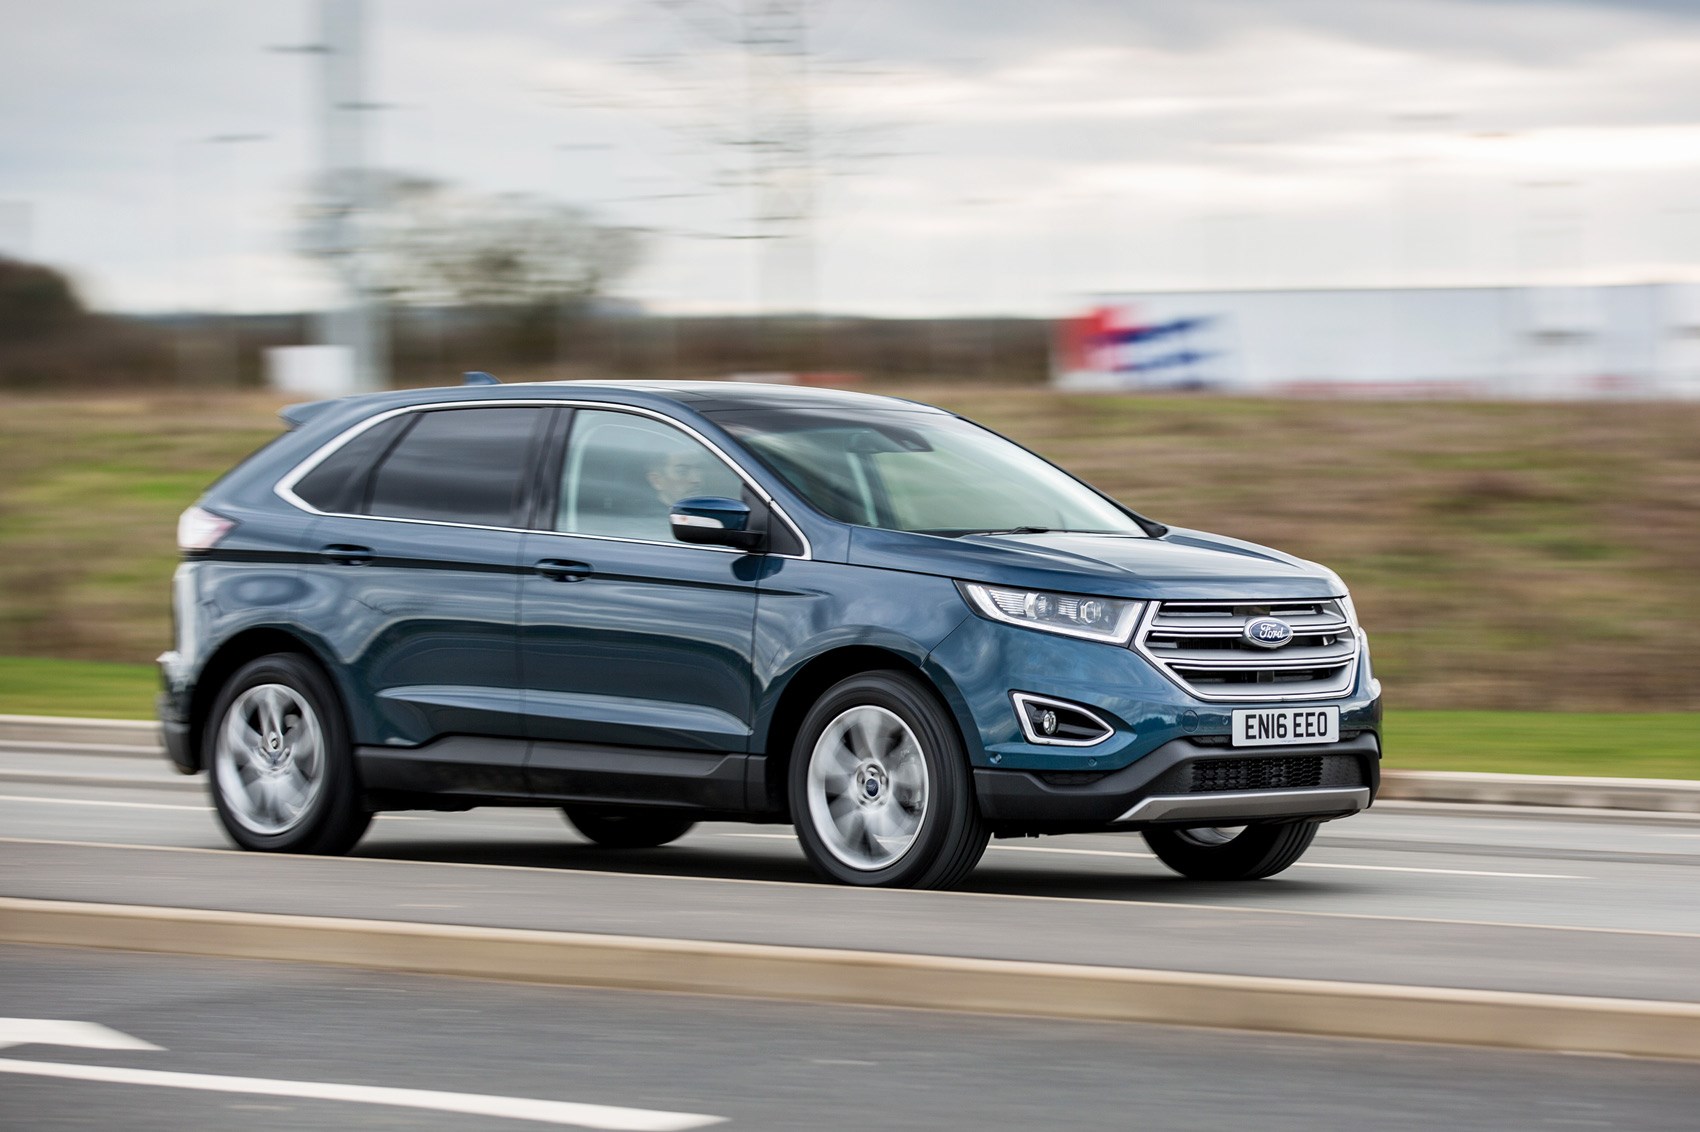 Ford Edge (2017) long-term test review